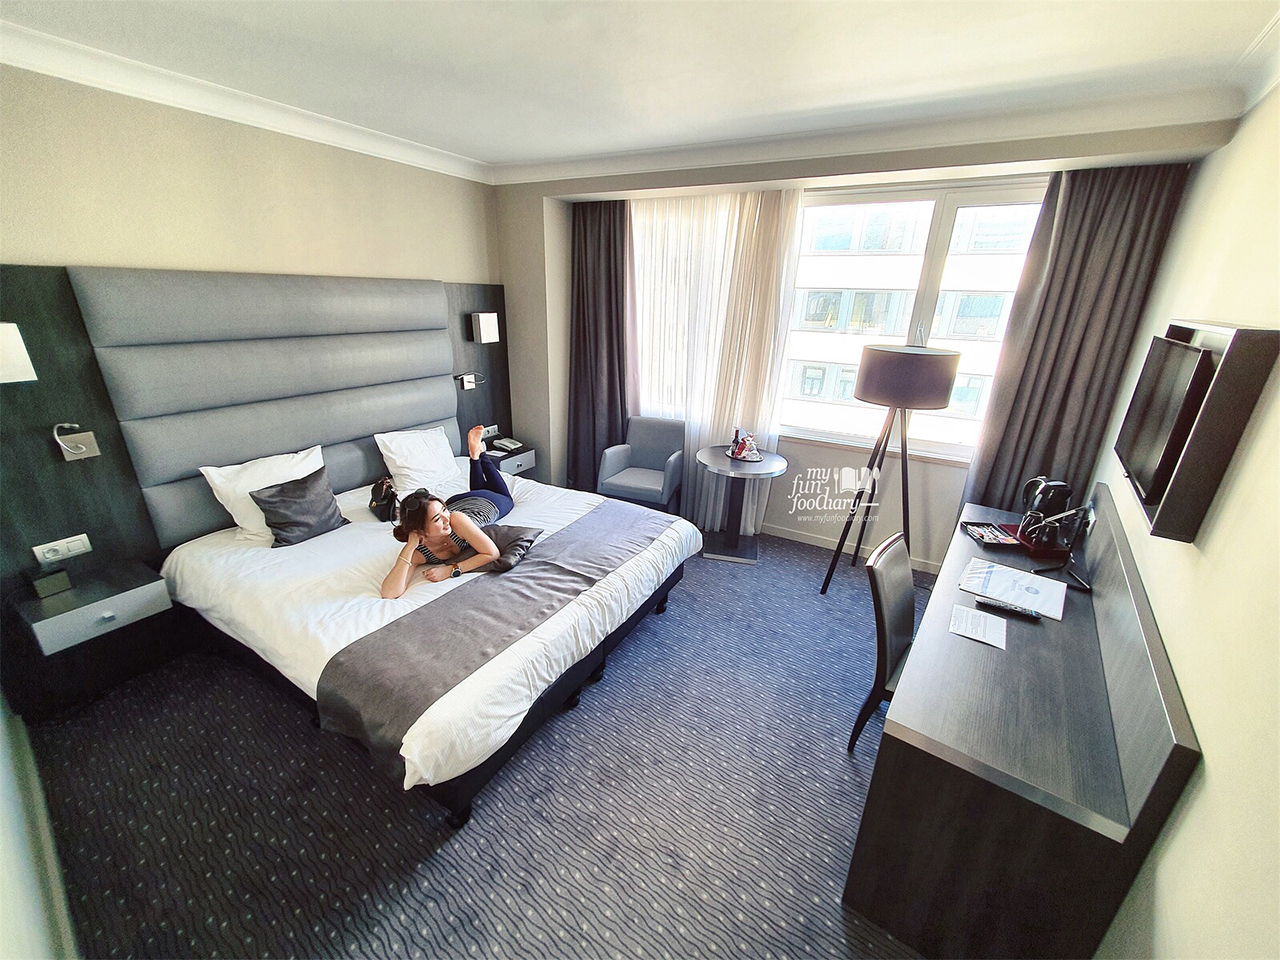 Comfortable Bed and Stay in Best Western Royale Centre in Brussels Belgium Travel Tips by Myfunfoodiary